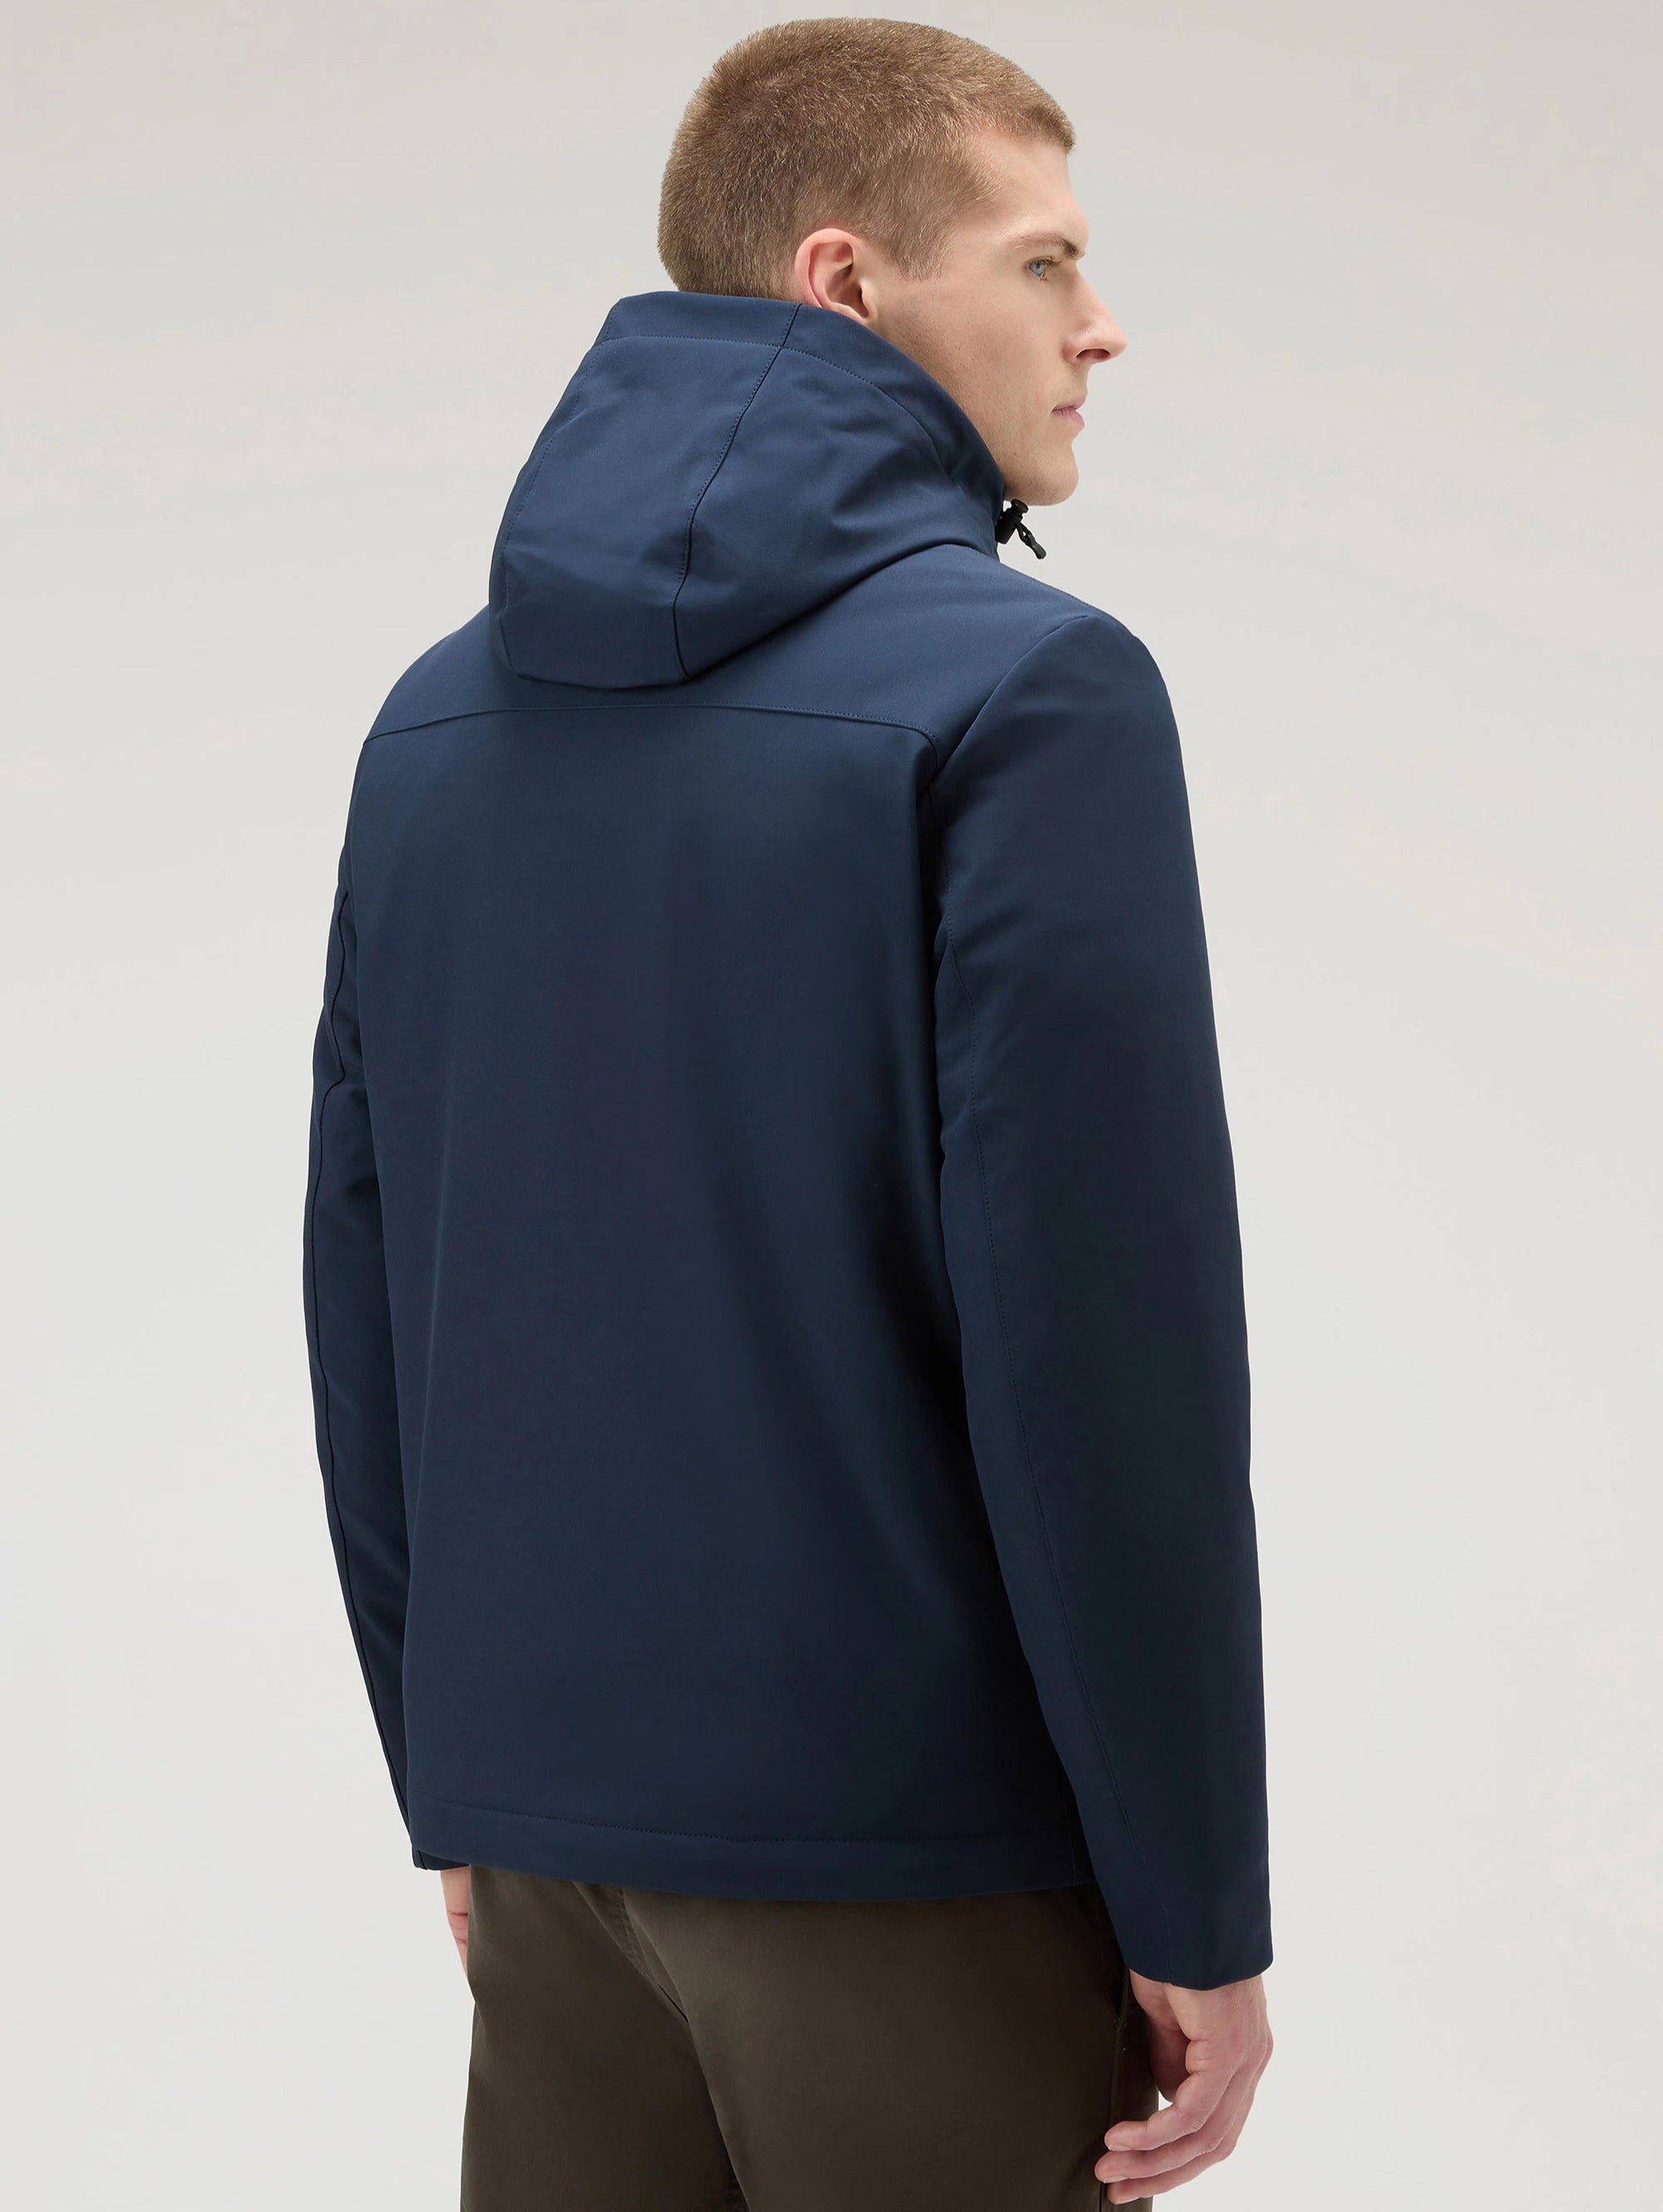 Pacific Blue Windproof Hooded Jacket